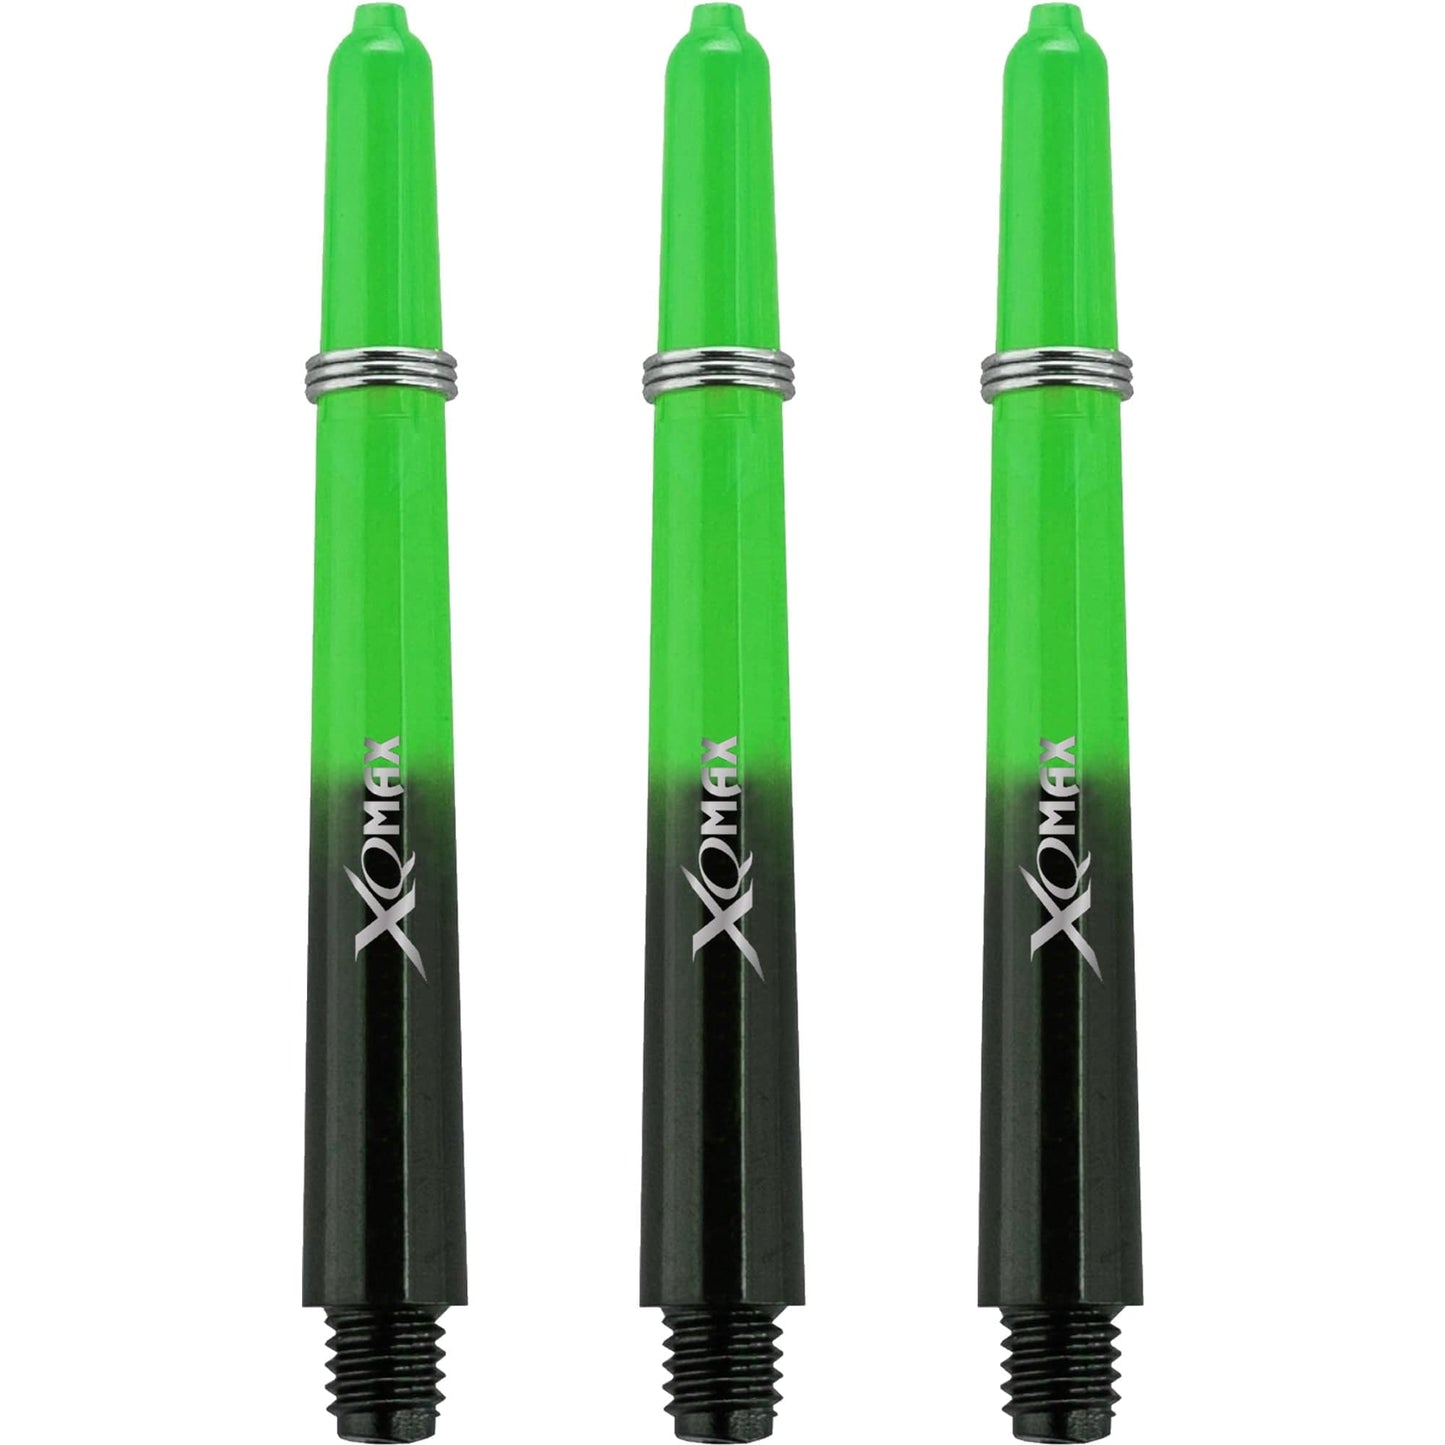 XQMax Gradient Polycarbonate Dart Shafts - with Logo - includes Springs - Black & Green Medium